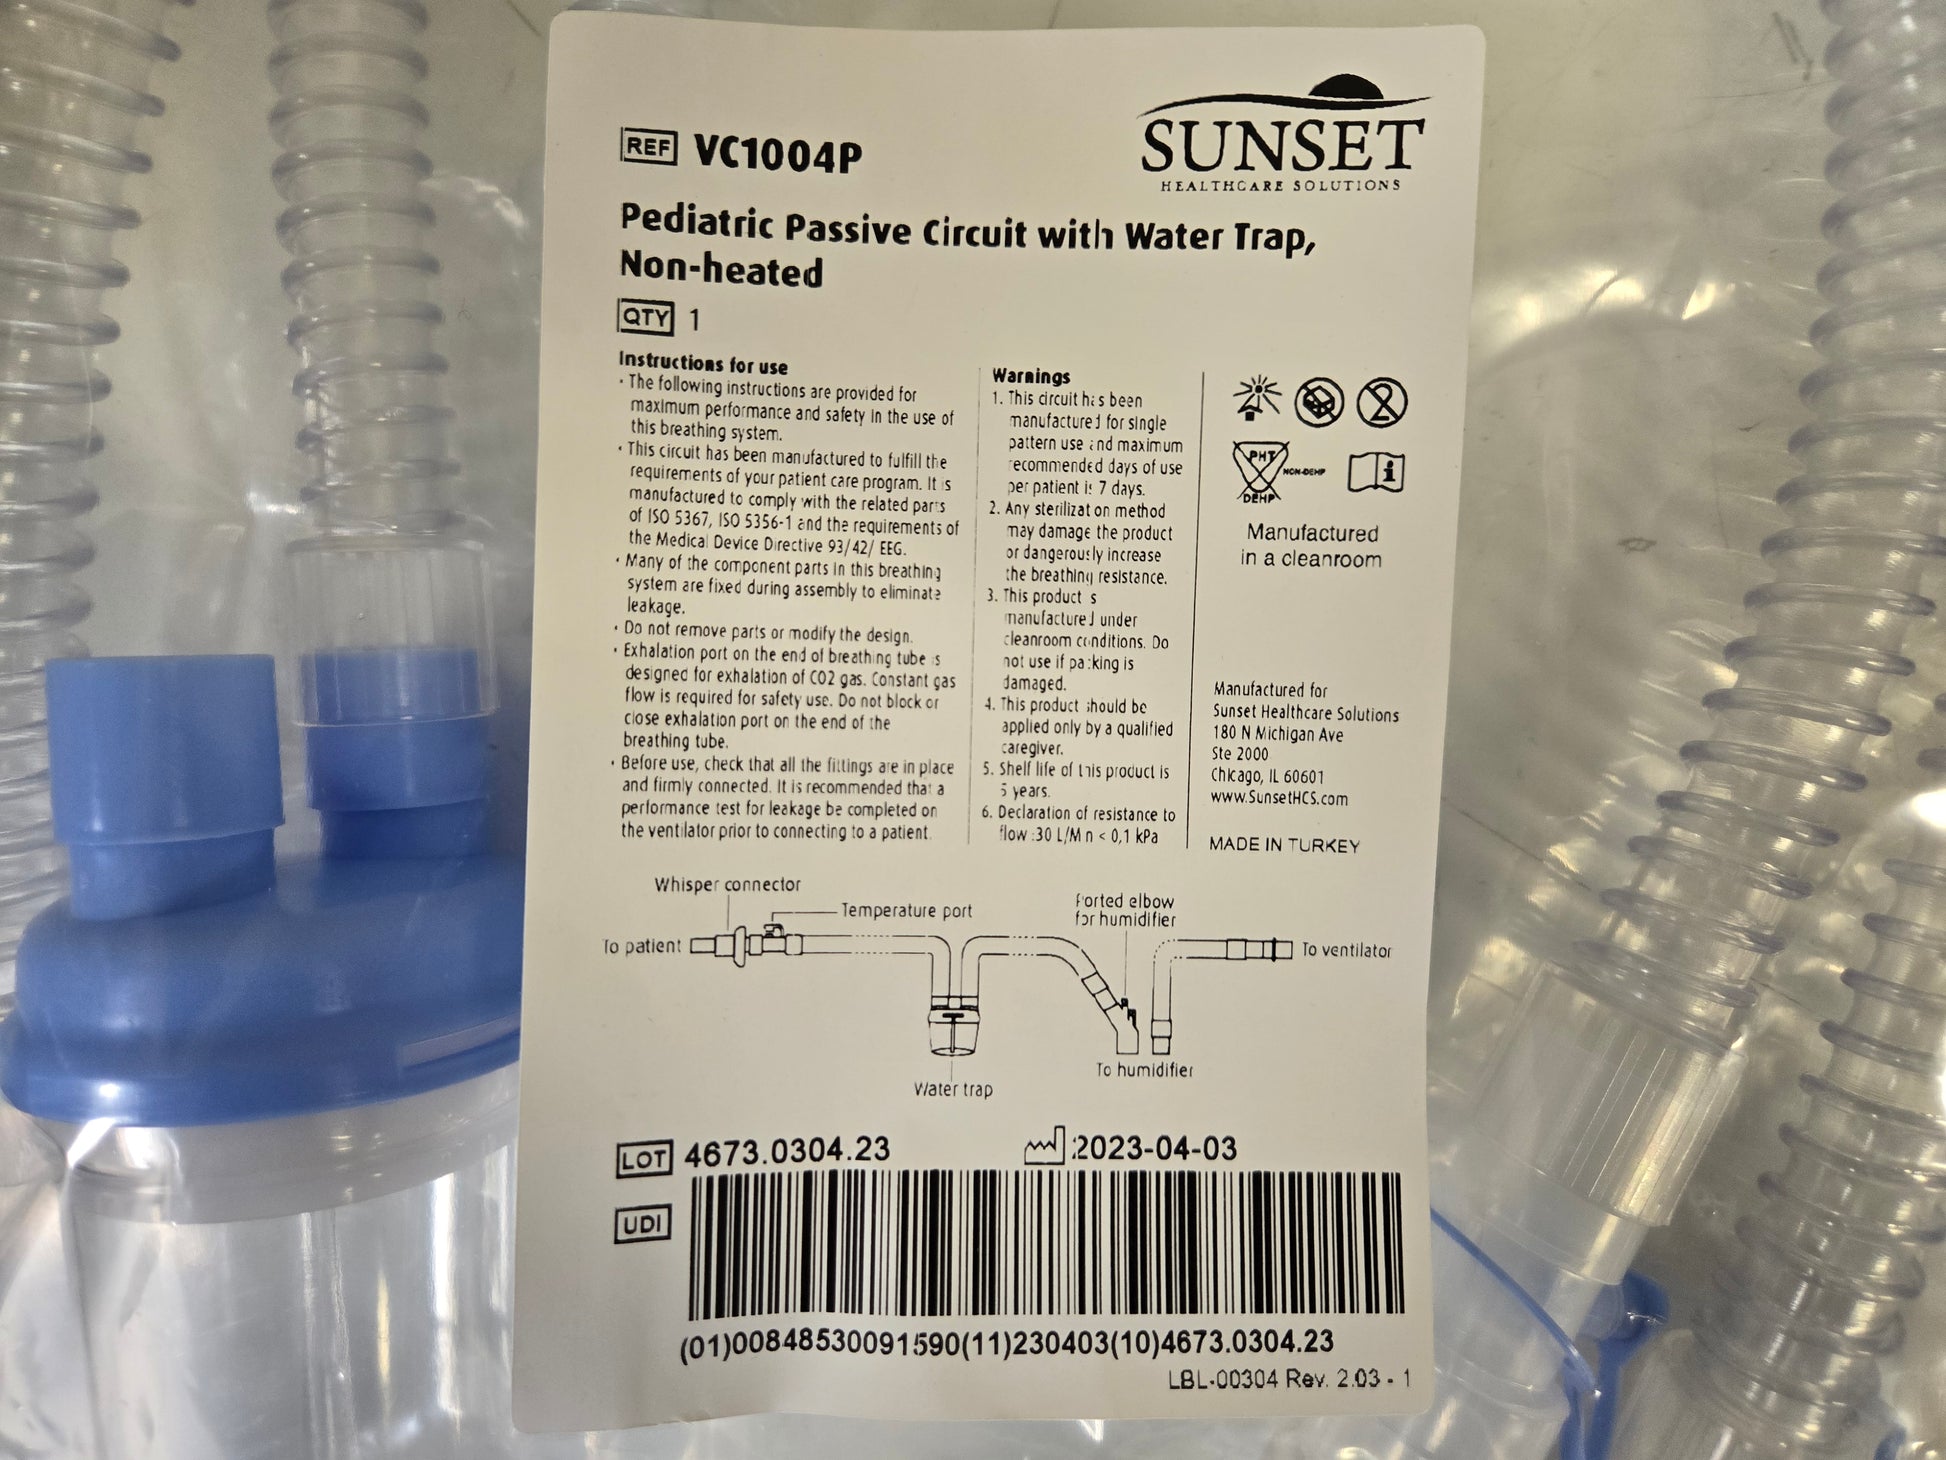 NEW Sunset Healthcare Solutions Pediatric Passive Circuit With Water Trap